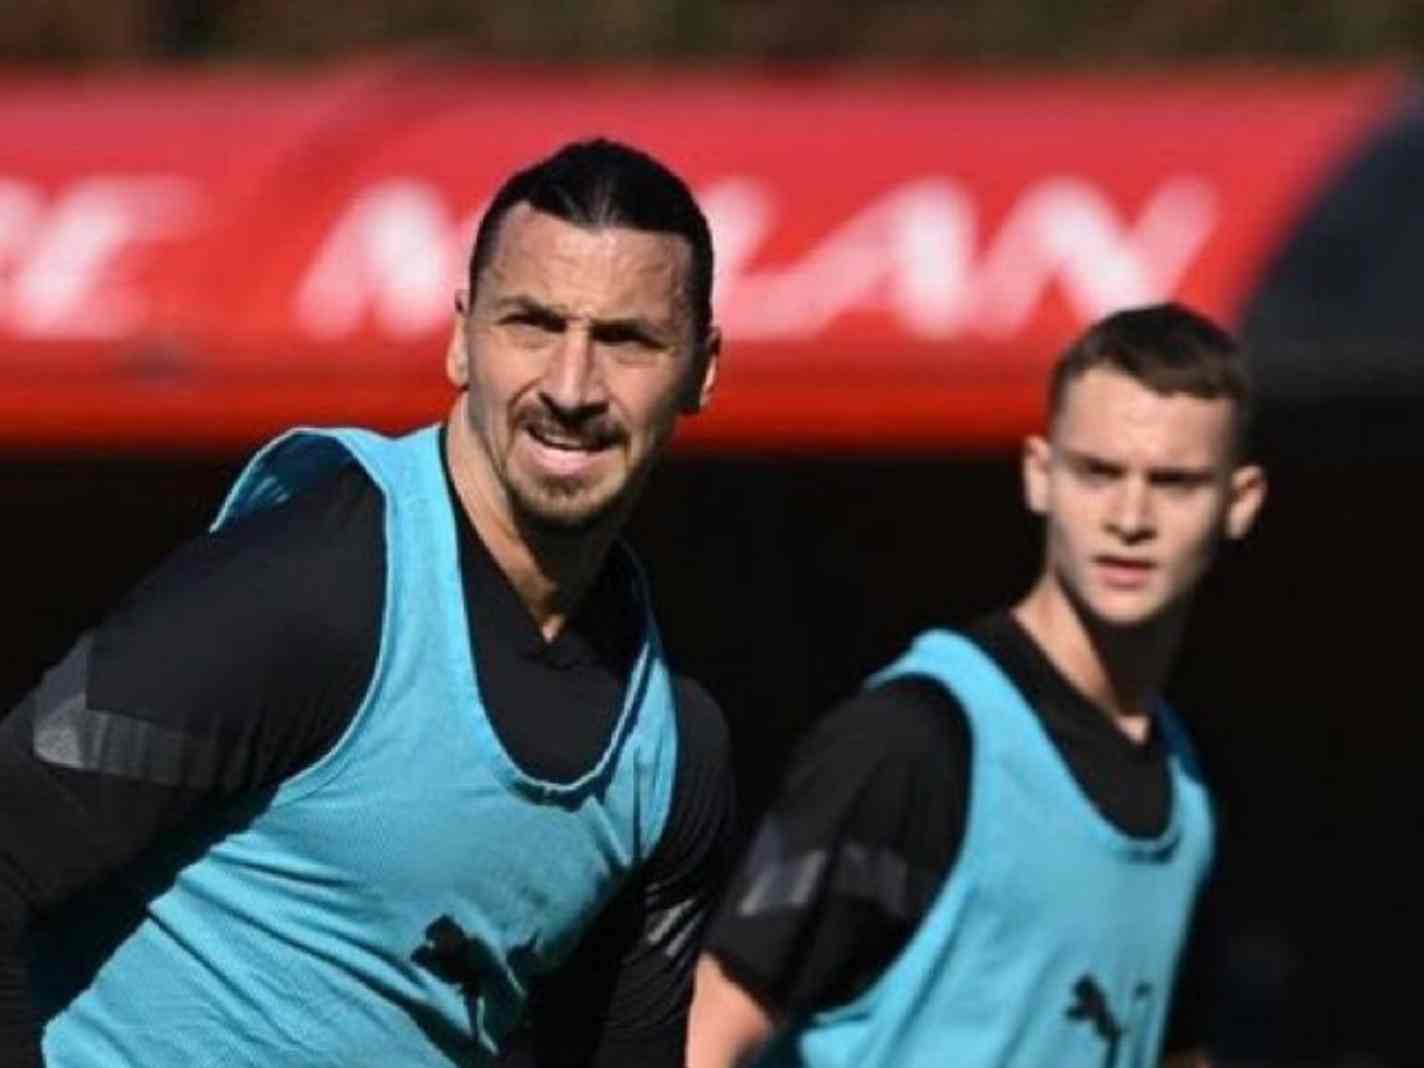 The Unsurprising Thing Zlatan Ibrahimovic Shares With His Sons Maximilian And Vincent